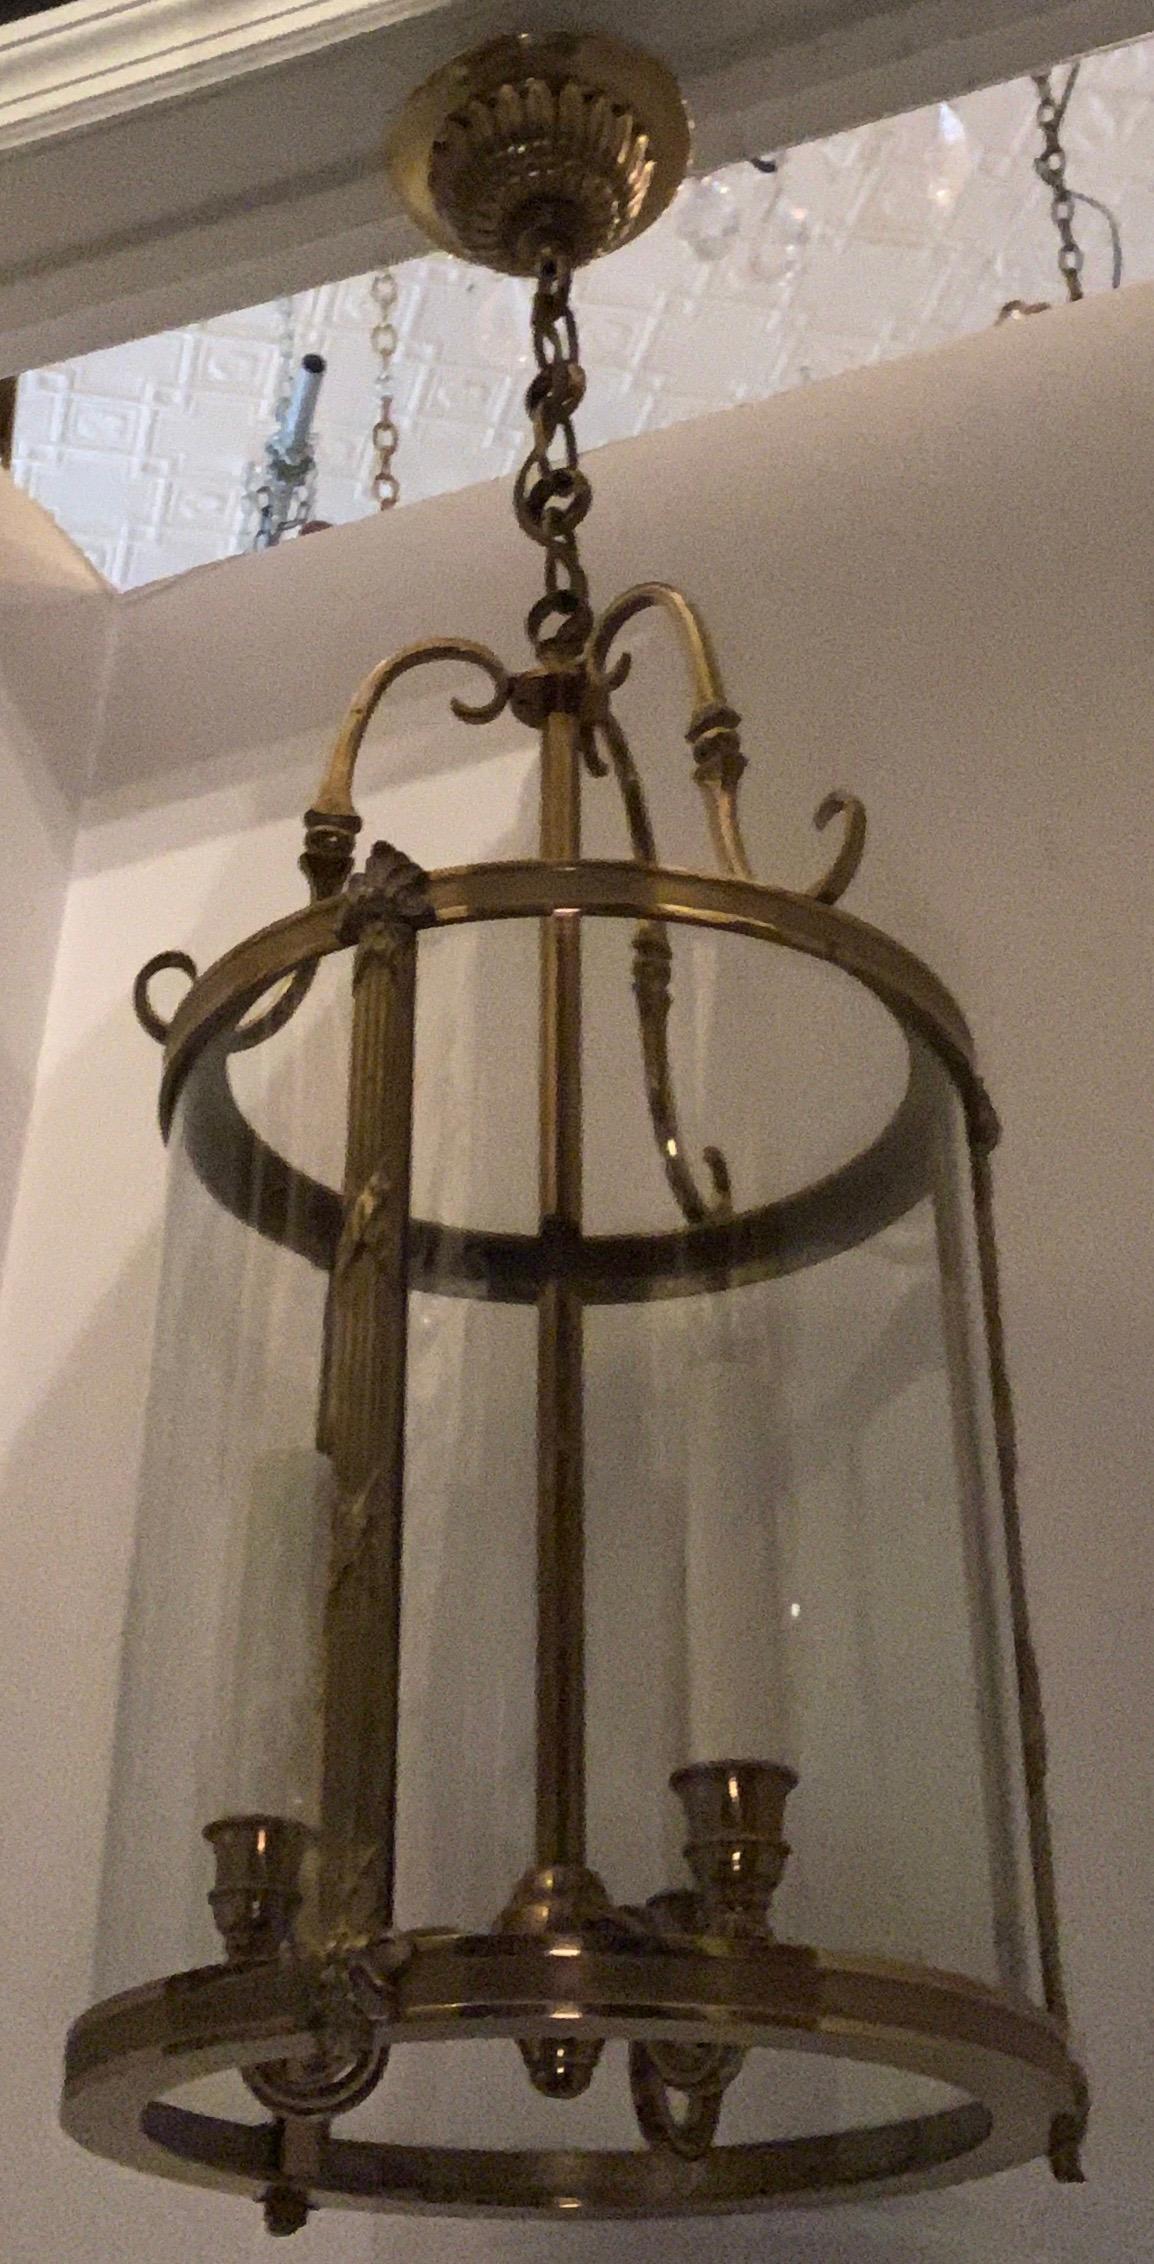 Petite gilt bronze readed X-pattern and curved glass lanterns fixtures set 4
four available
Each sold separately.